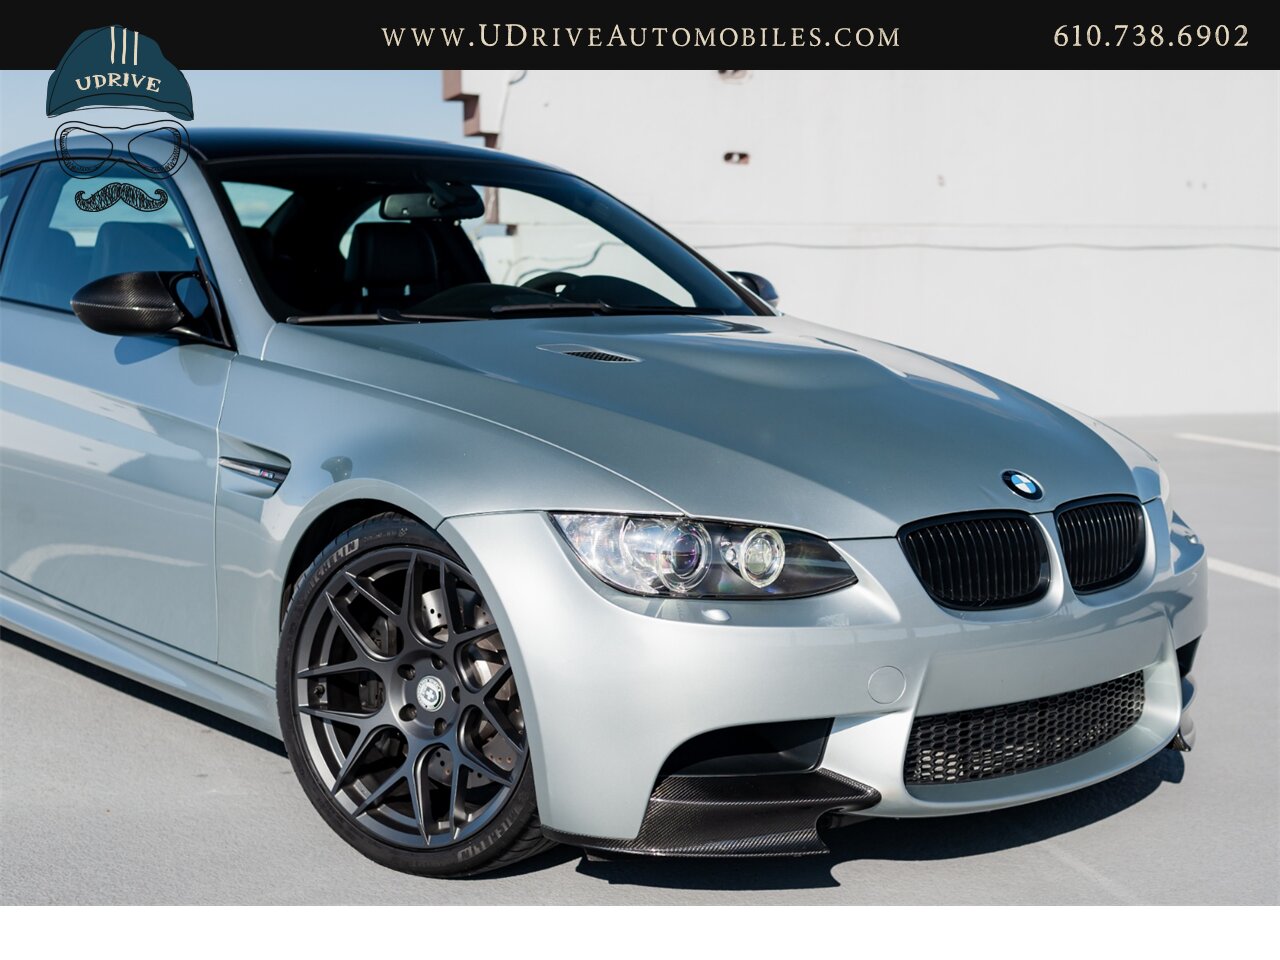 2008 BMW M3 Dinan S3-R M3 1 of 36 Produced DCT  1 Owner Full Service History 4.6L Stroker V8 - Photo 13 - West Chester, PA 19382